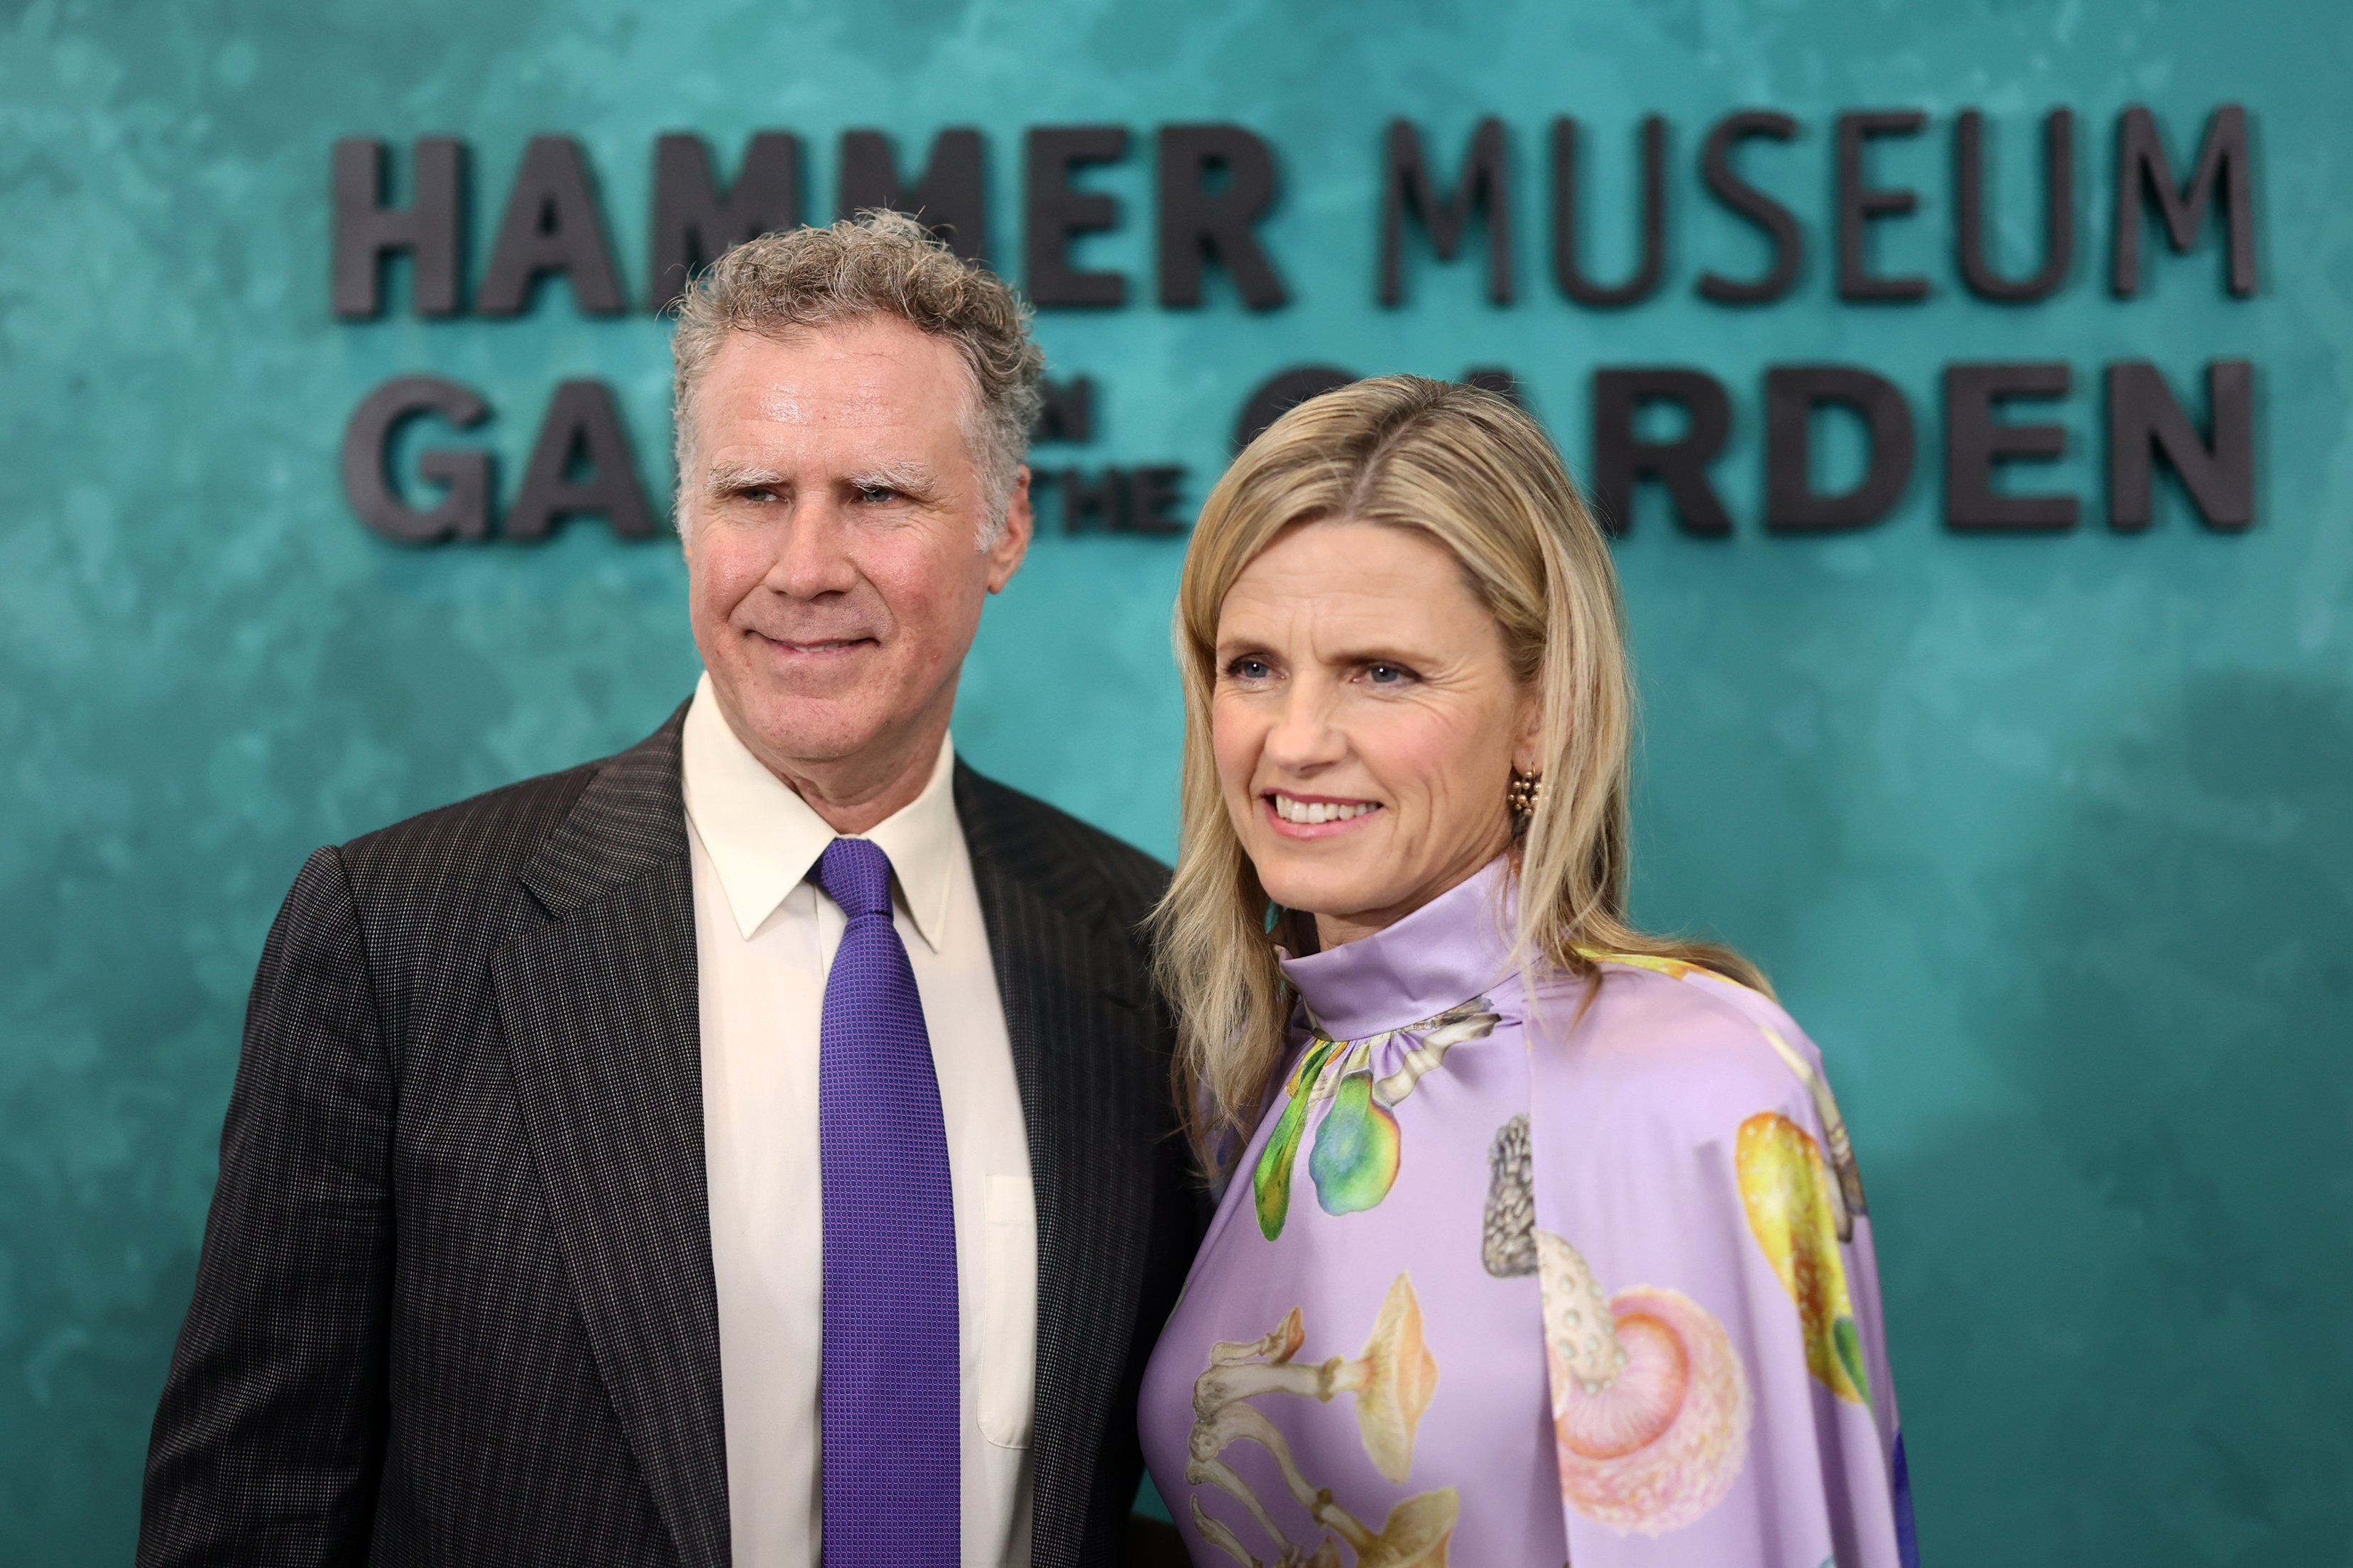 Will Ferrell and Viveca Paulin attend the 18th Annual Gala of Hammer Museum on October 8, 2022, in Los Angeles, California. | Source: Getty Images